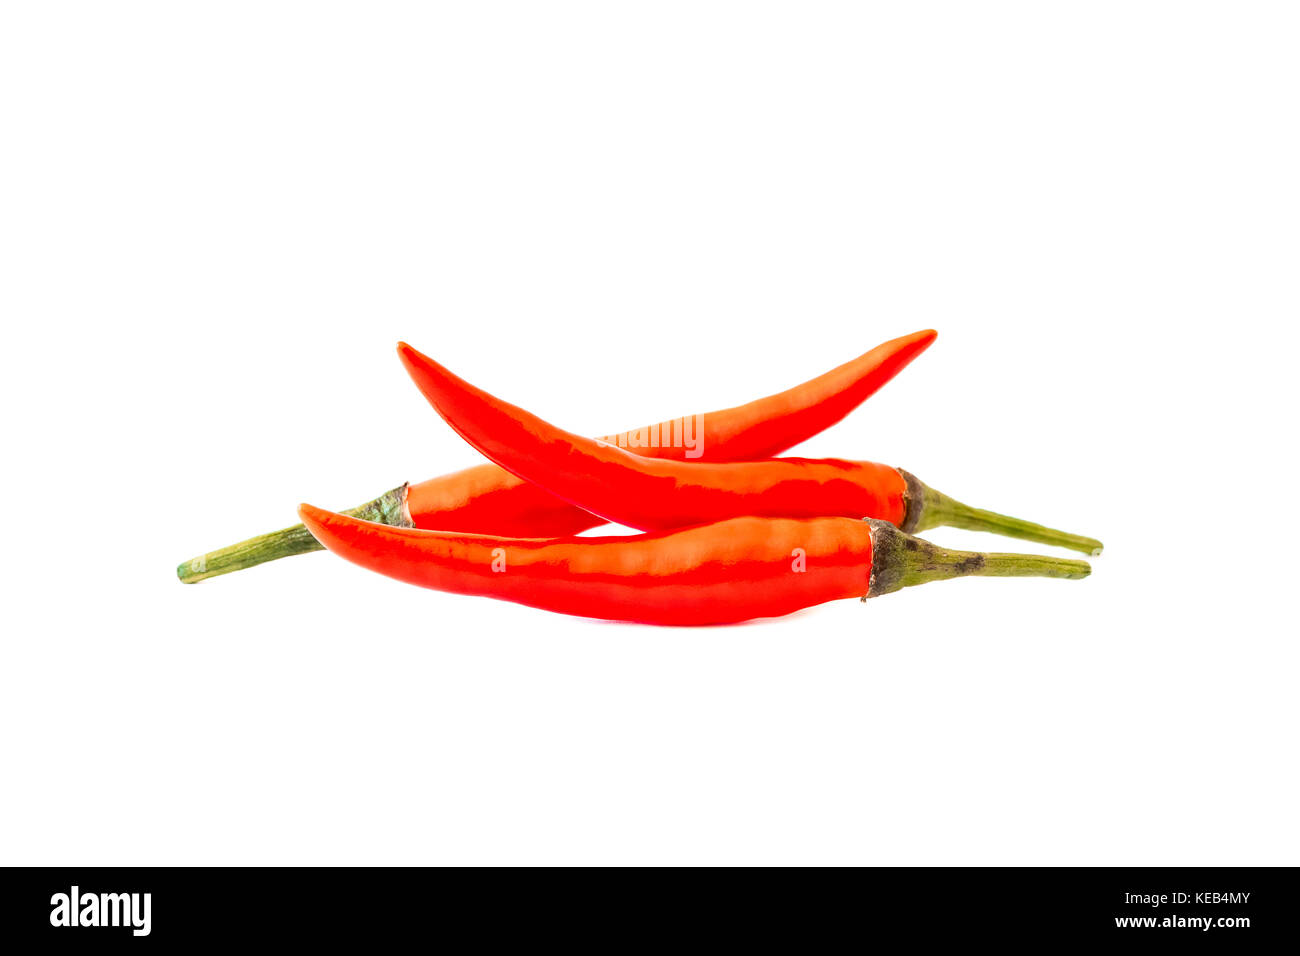 Group of three chili peppers isolated on white background as package design element Stock Photo